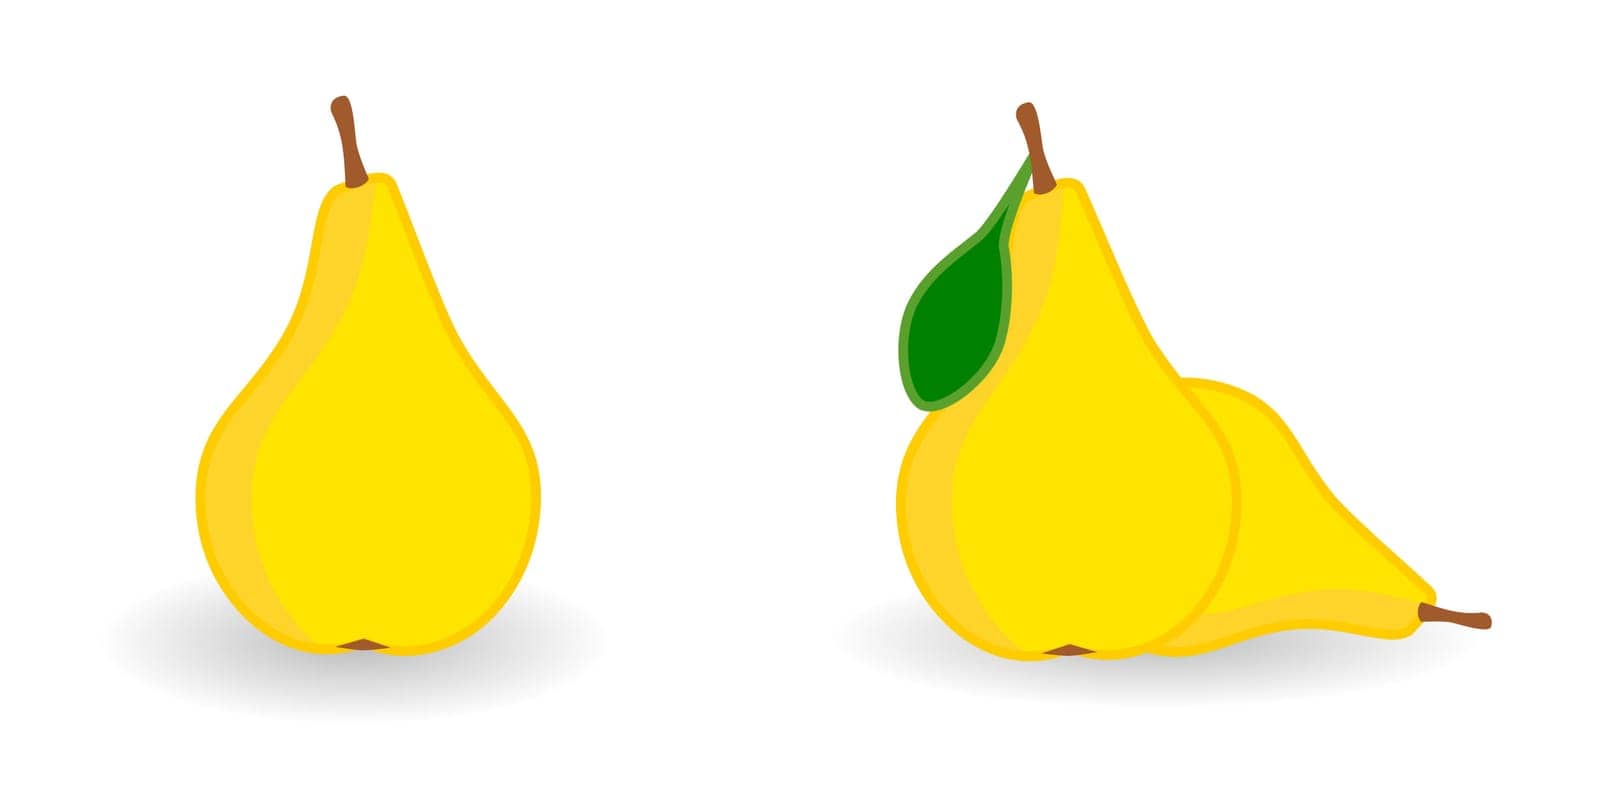 Simple Yellow pear icon, version with single and two fruits. by Ivanko